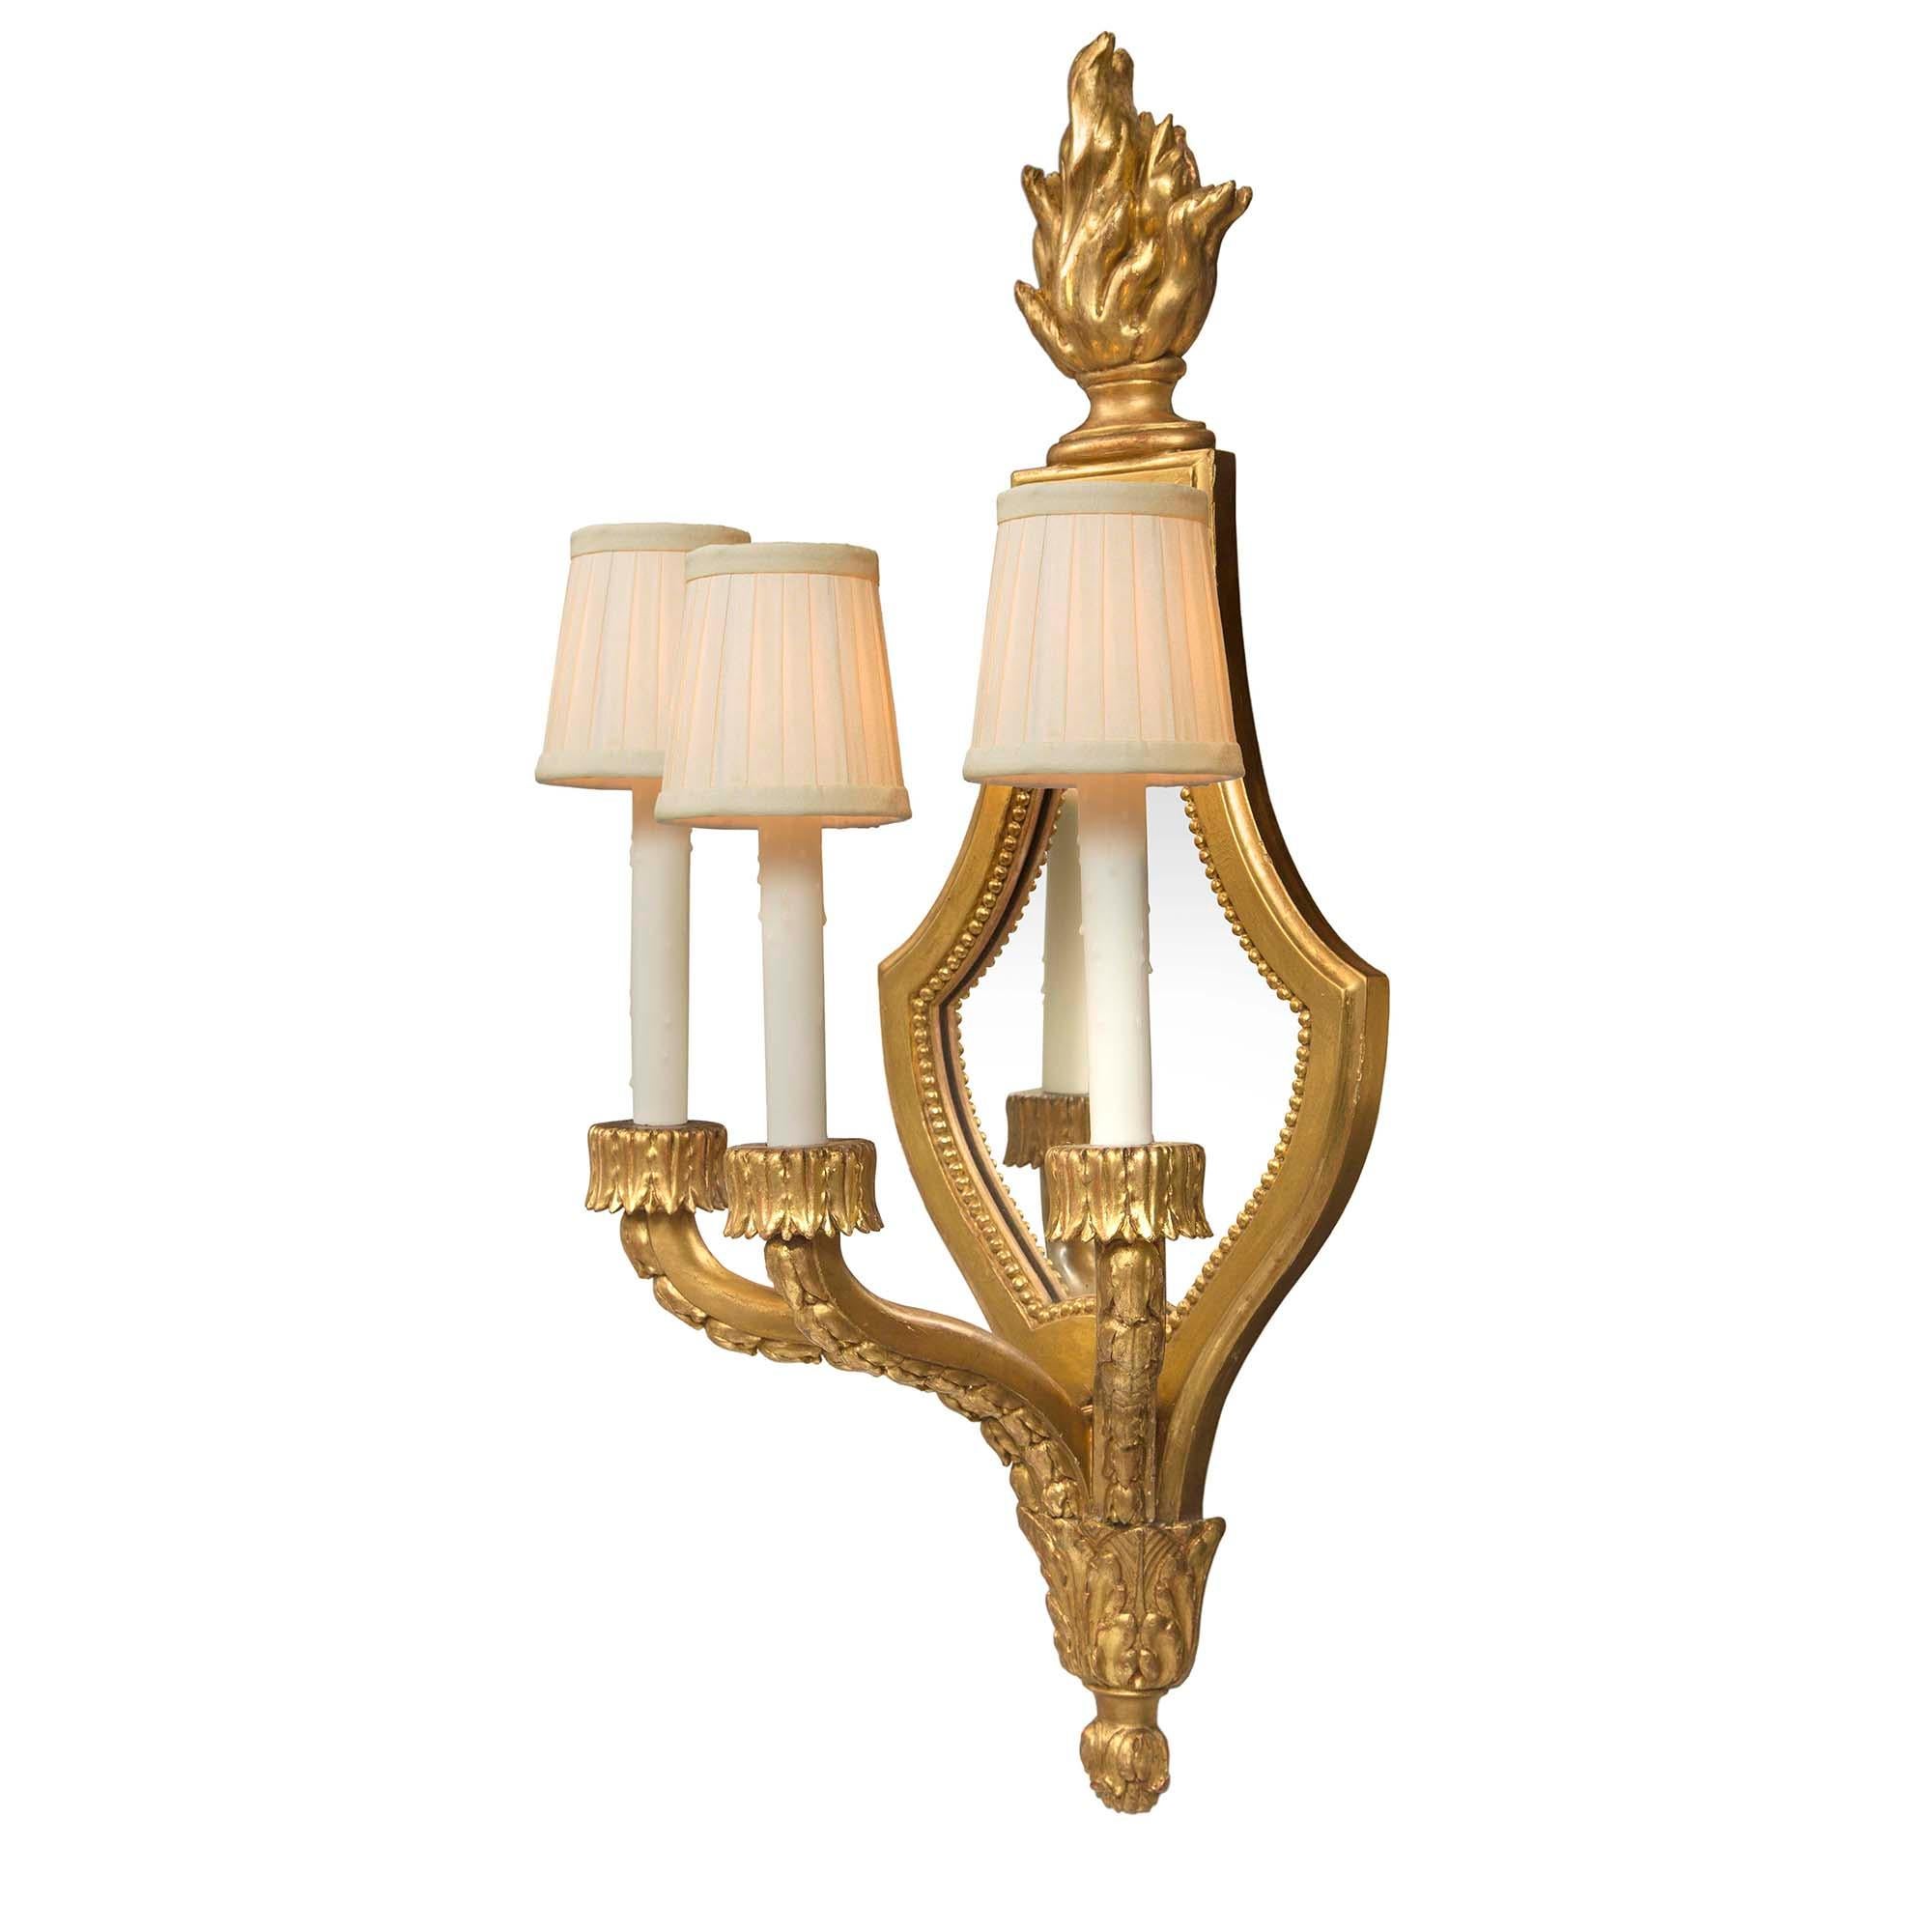 An elegant pair of French 19th Century Louis XVI st. giltwood three-arm mirrored sconces. Each sconce is centered by a fine bottom acorn inverted finial below large acanthus leaves. The three S-scrolled arms display finely carved berried laurel